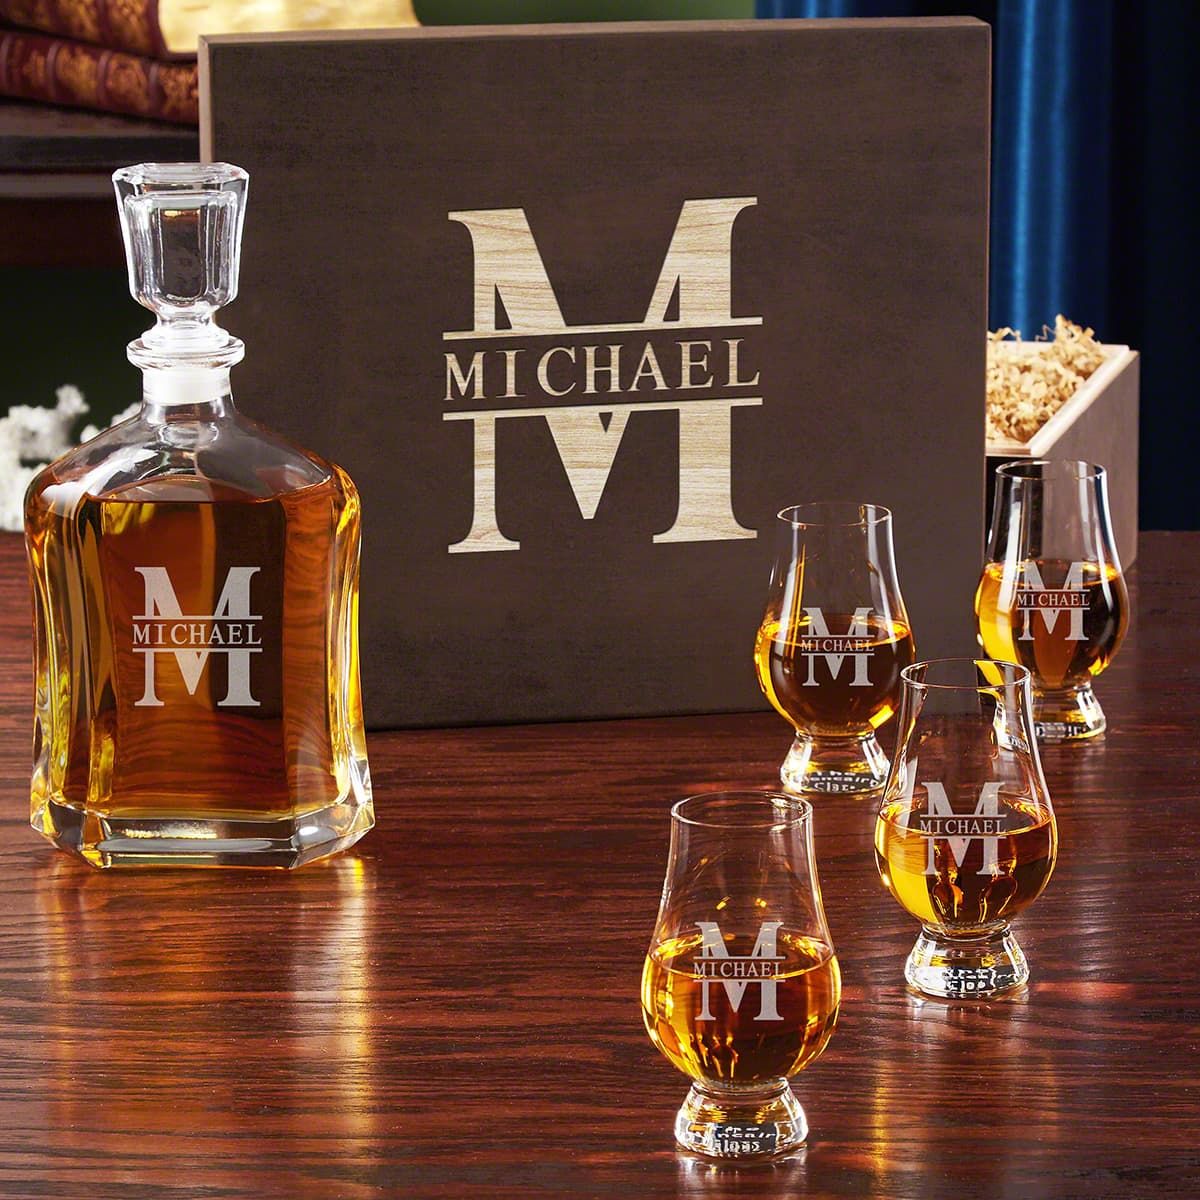 https://images.homewetbar.com/media/catalog/product/o/a/oakmont-personalized-whiskey-decanter-set-with-gift-box-p_10341.jpg?store=default&image-type=image